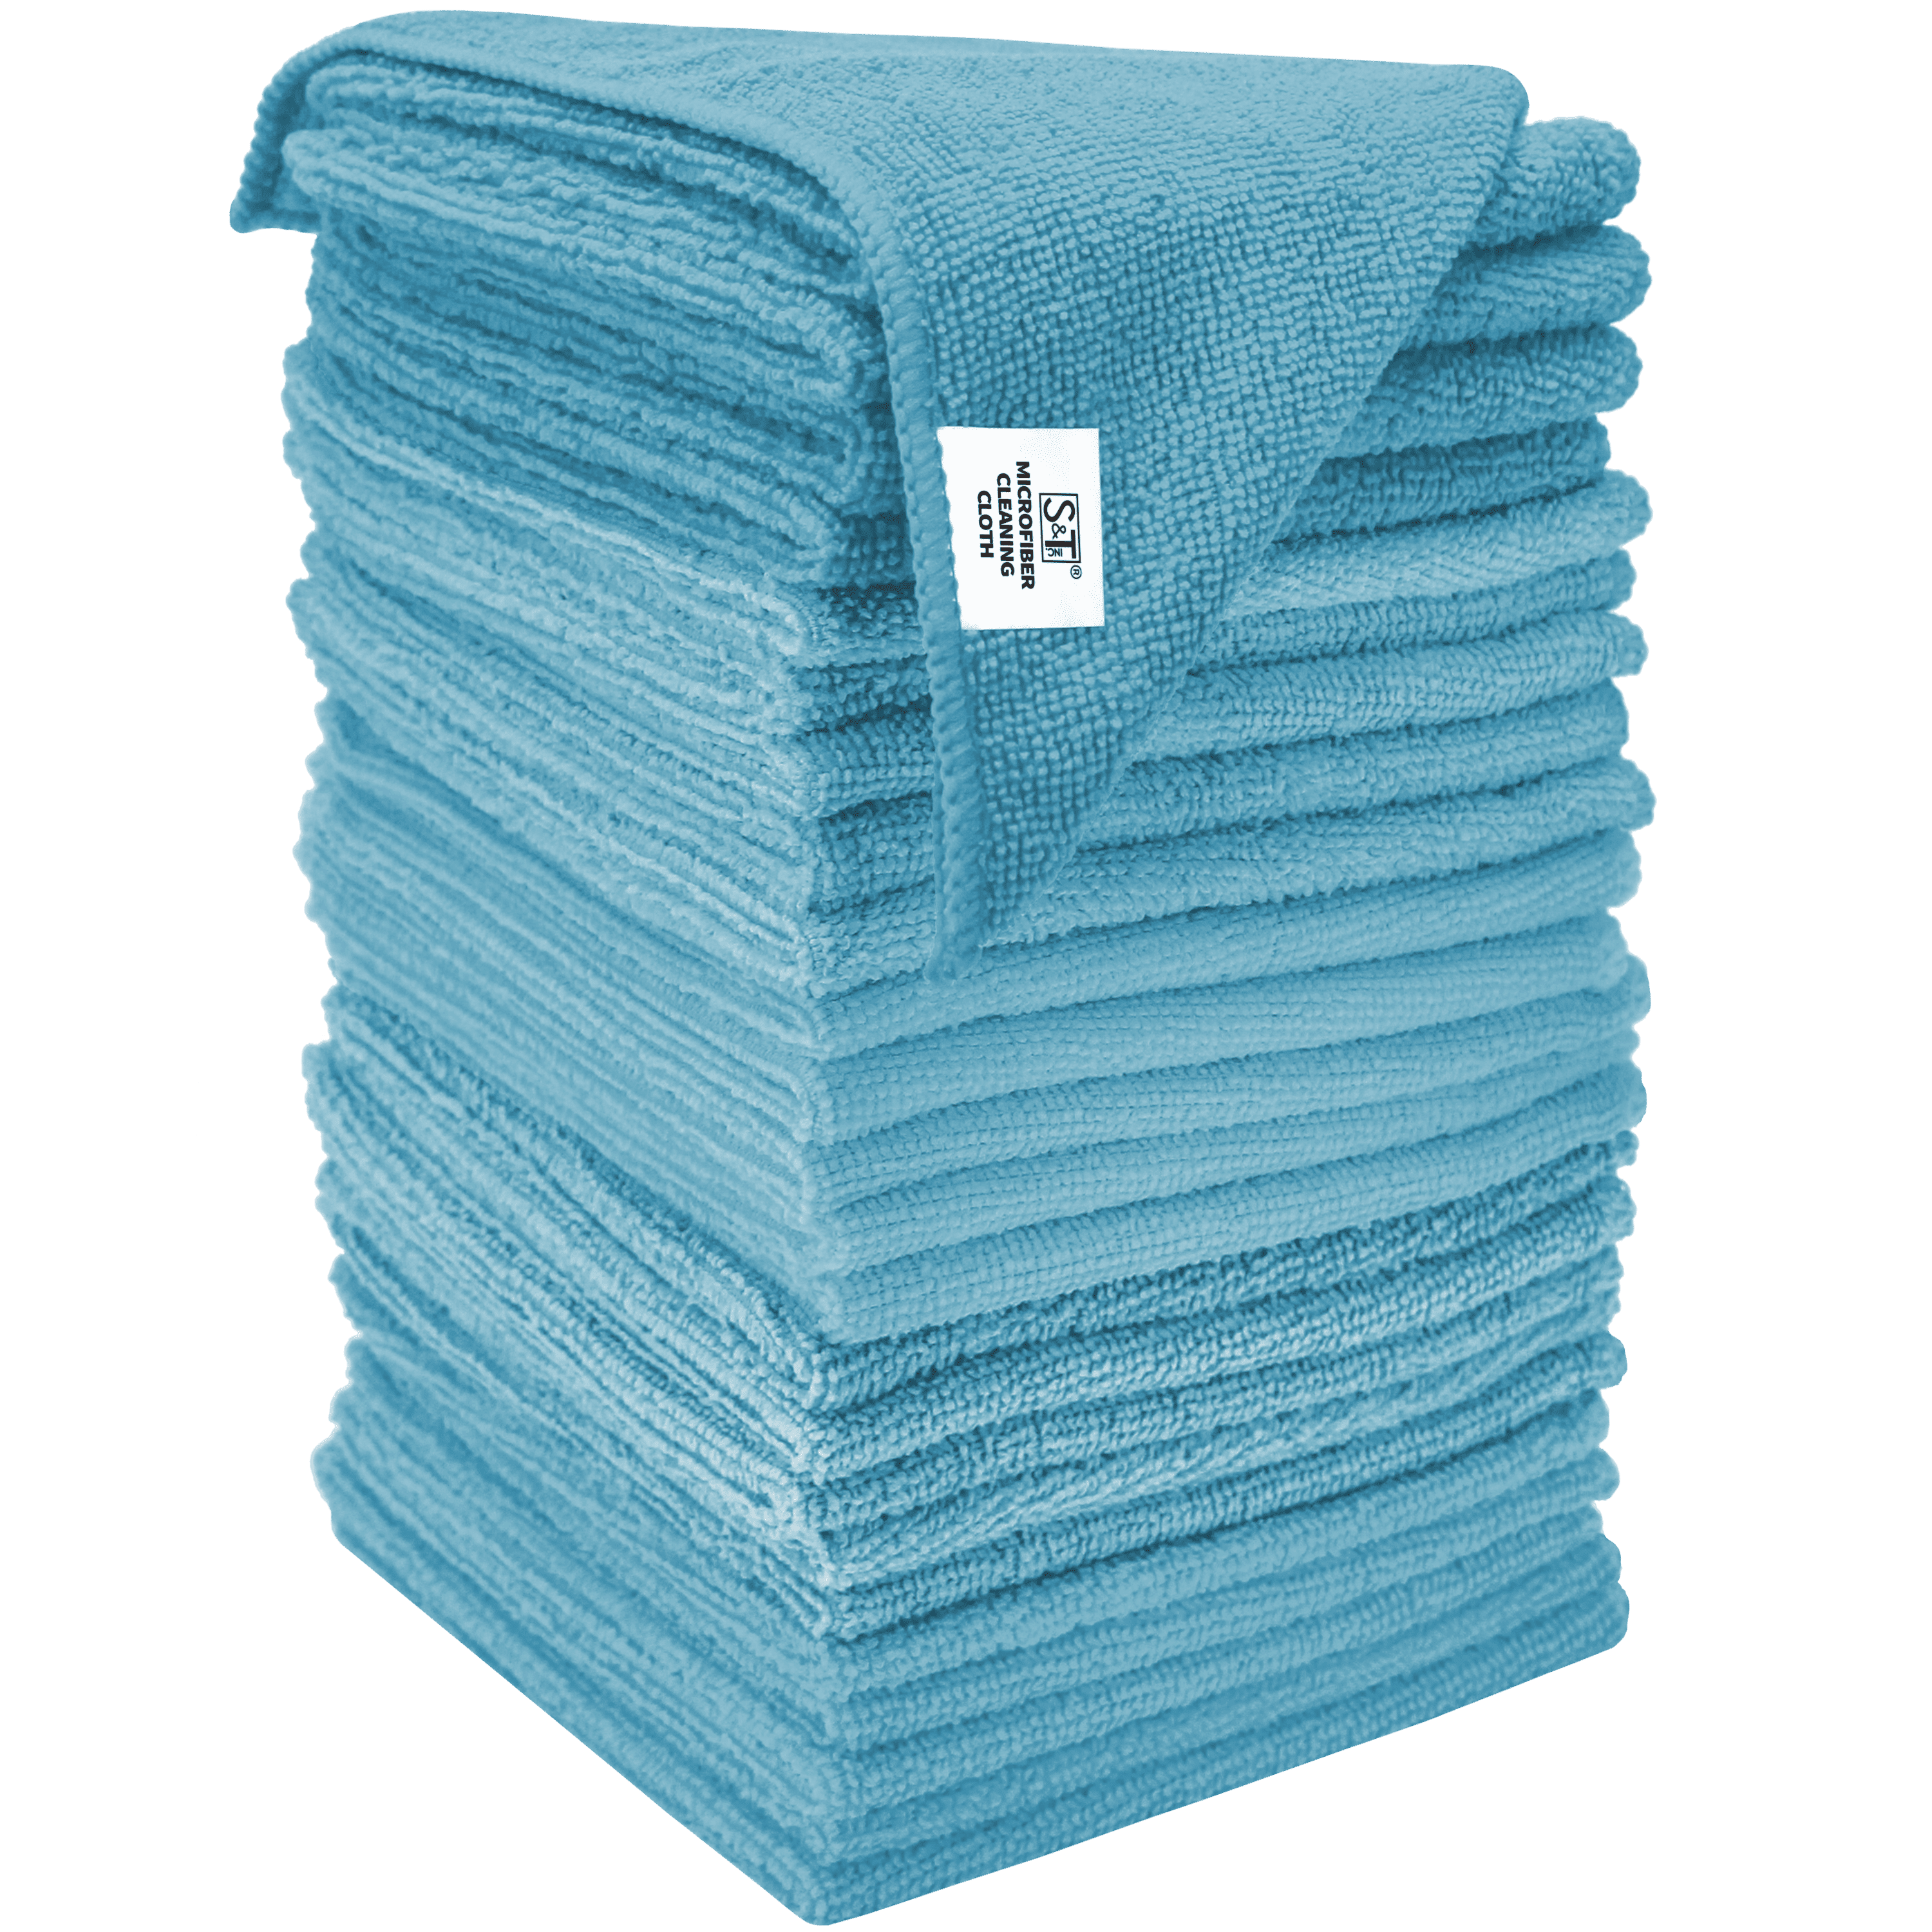 Streak Free Cleaning Cloth FREE SHIPPING Home 18 PACK Chemical Free Car 